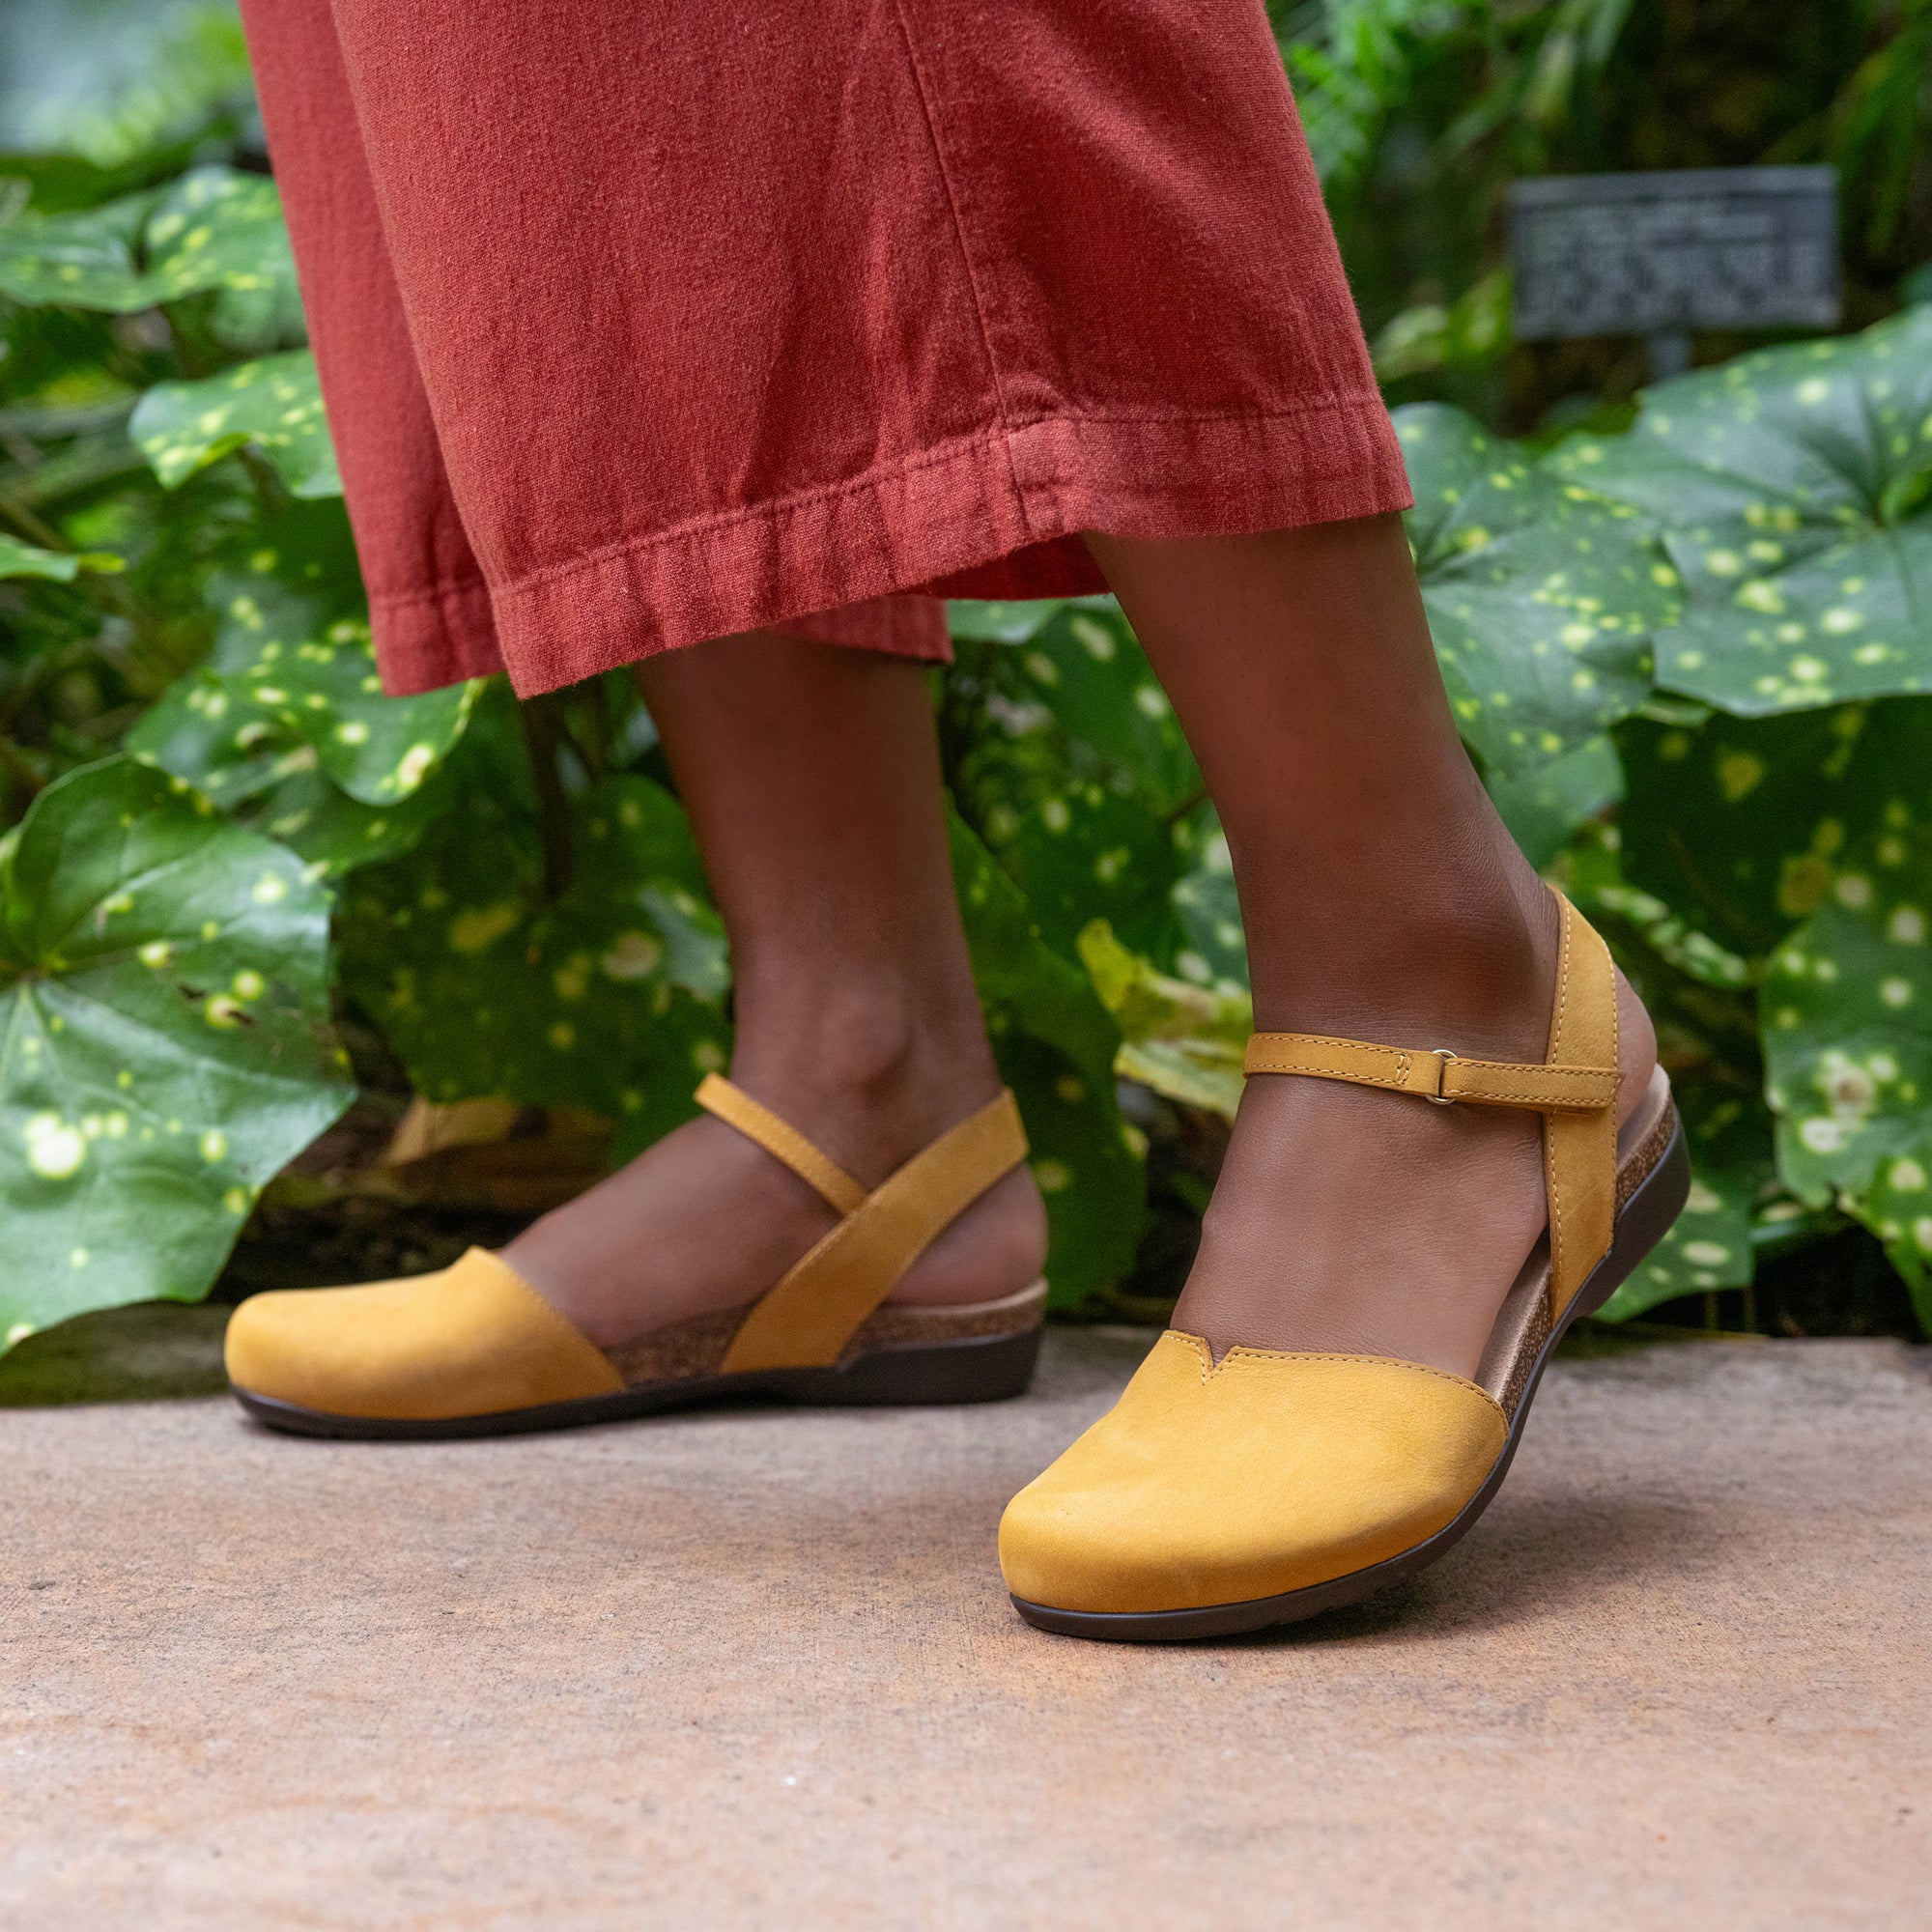 Closeup of yellow Mary Jane sandals with an adjustable ankle strap.